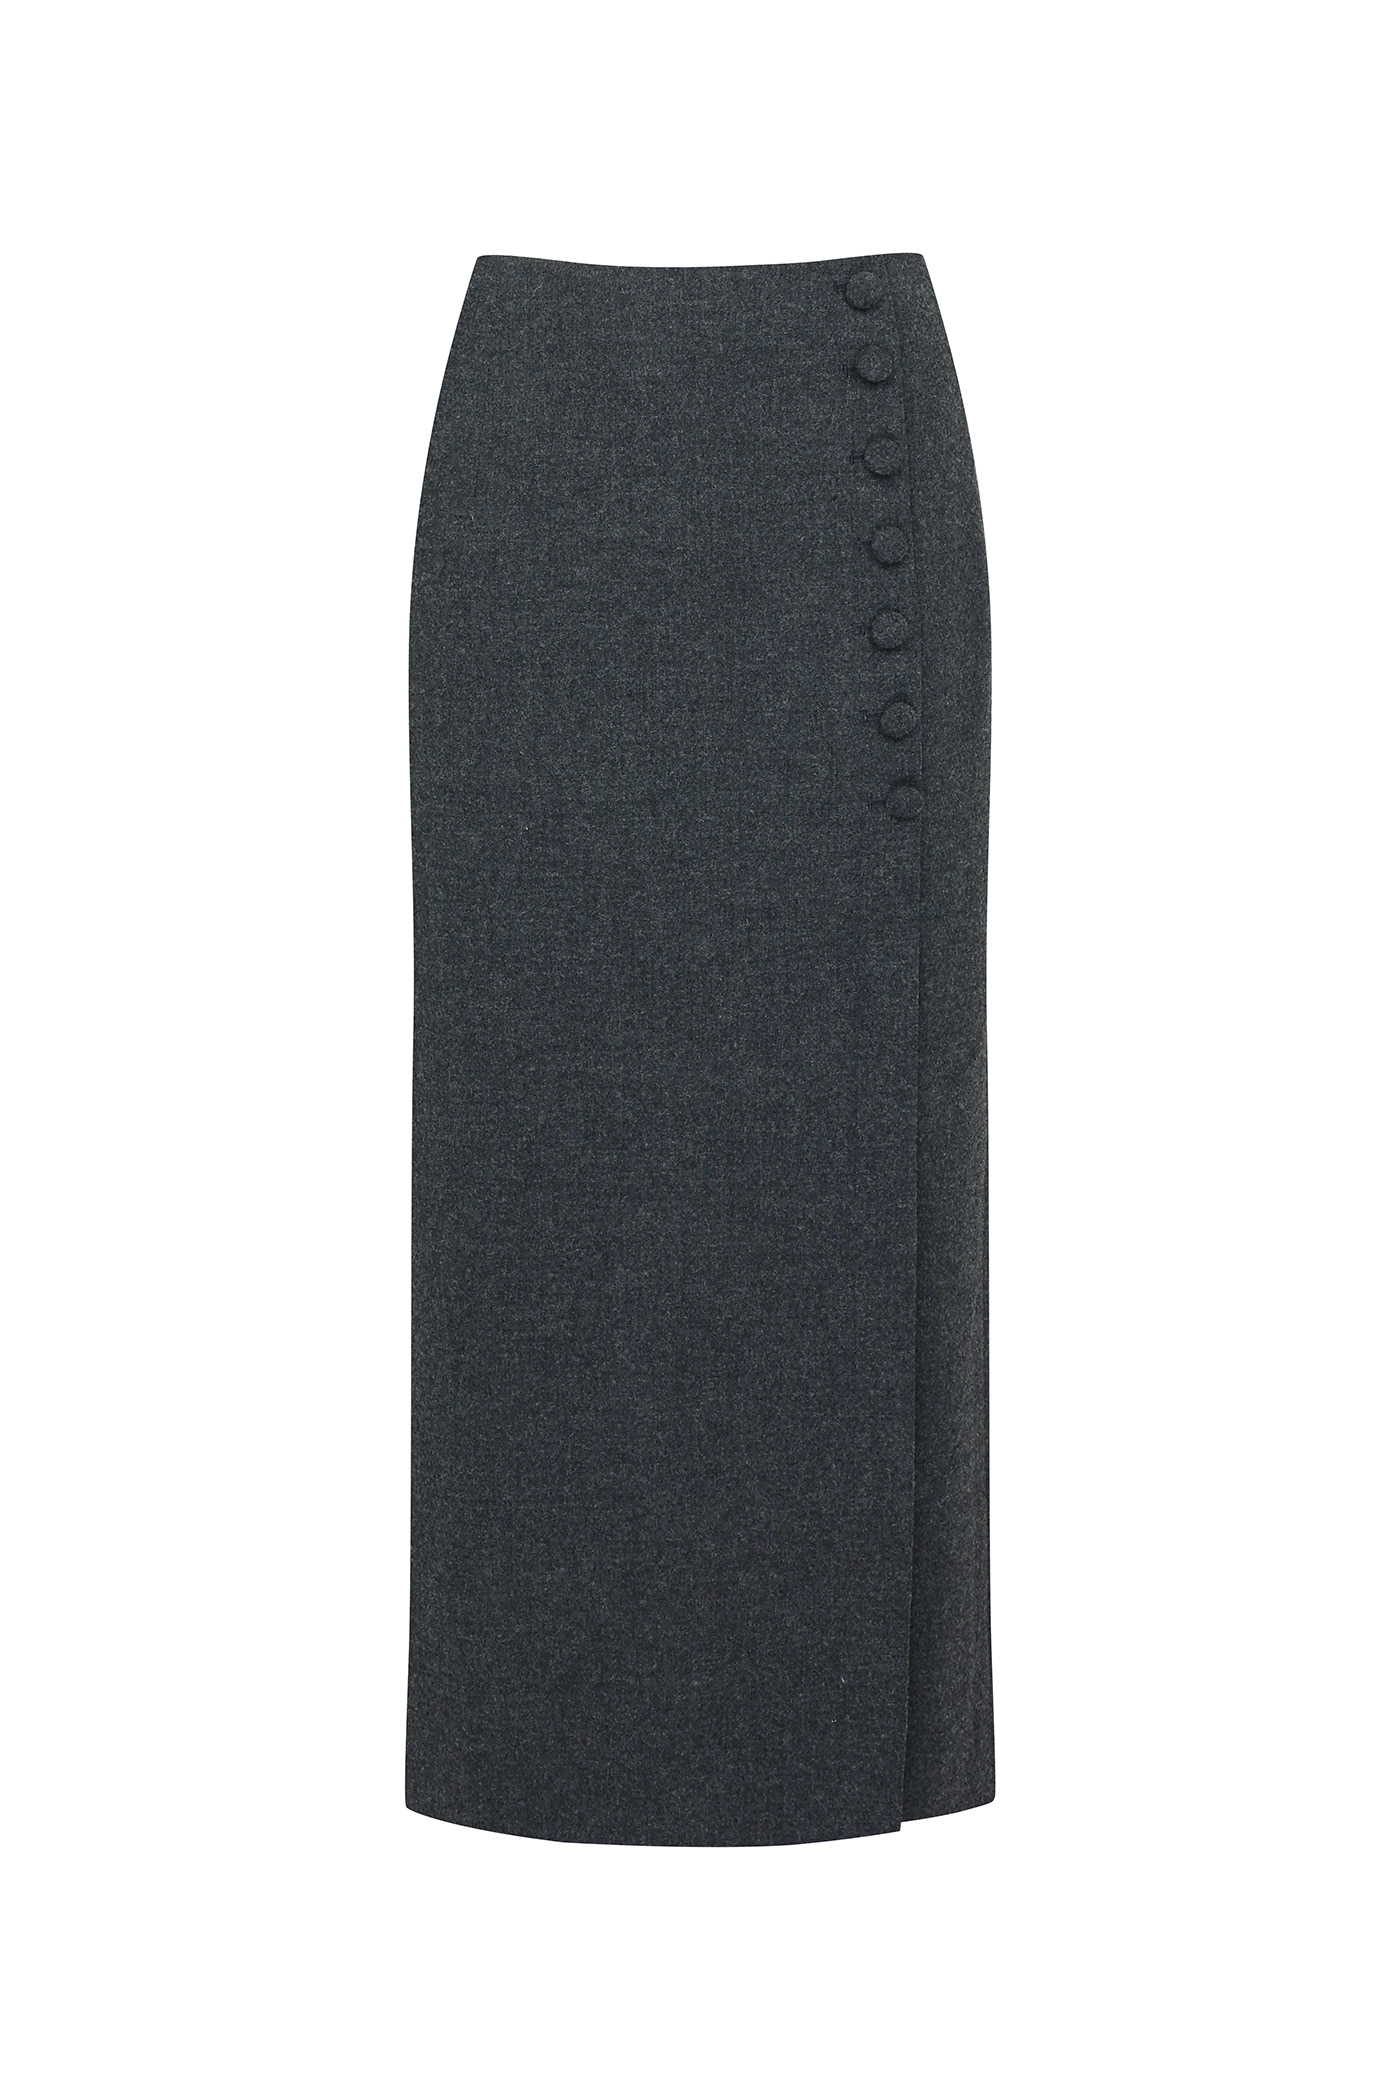 [SAMPLE][오승아 착용]Button Slit Skirt[LMBBAUSK203]-Charcoal